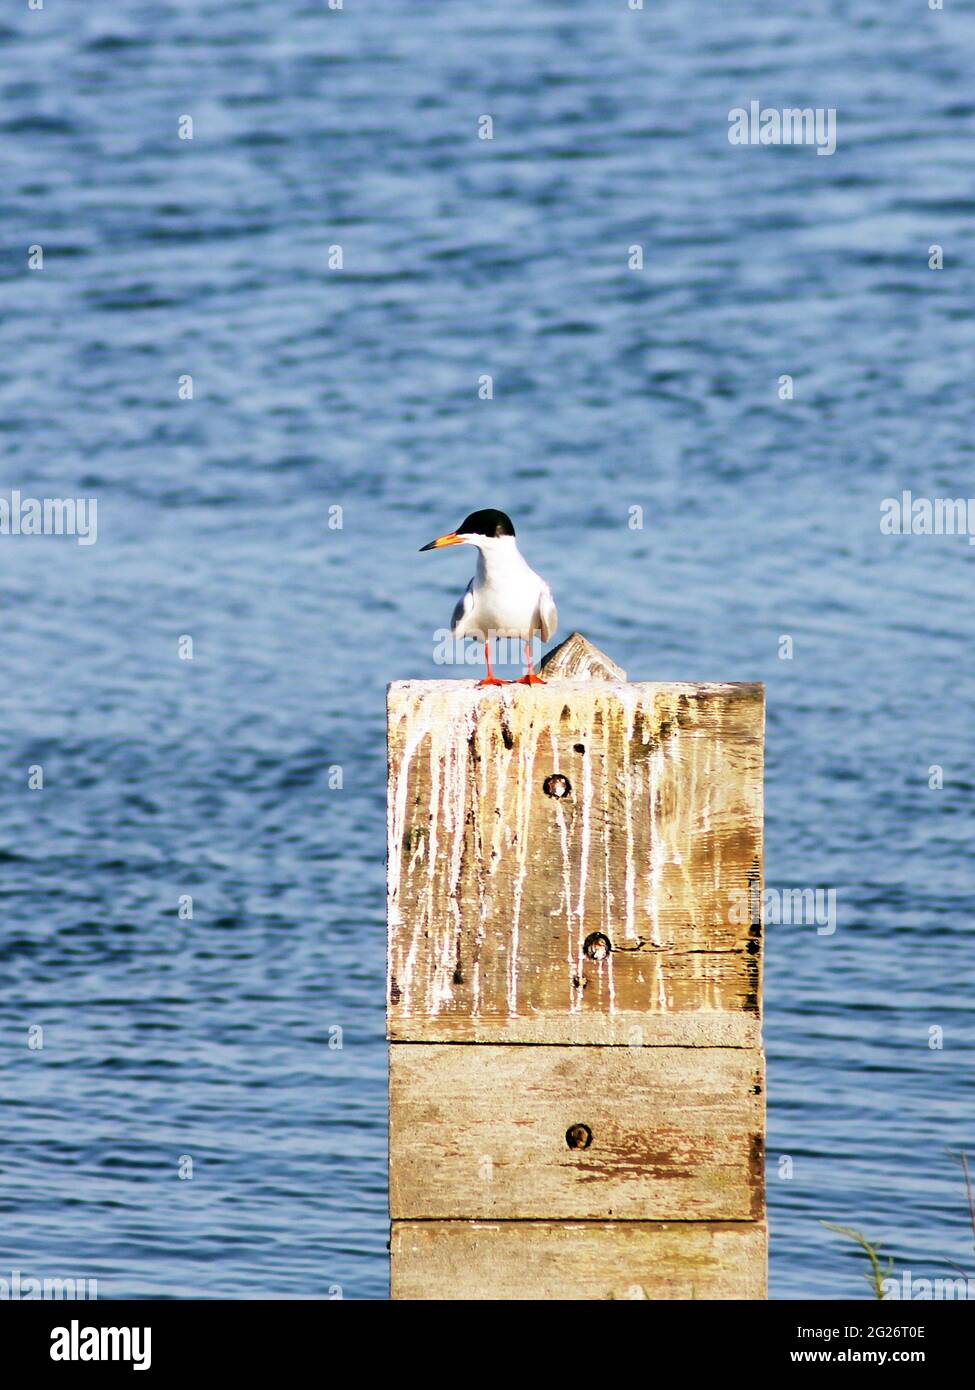 Grey and White Plumage on a Fosters Tern Perched on a Wooden Piling Stock Photo